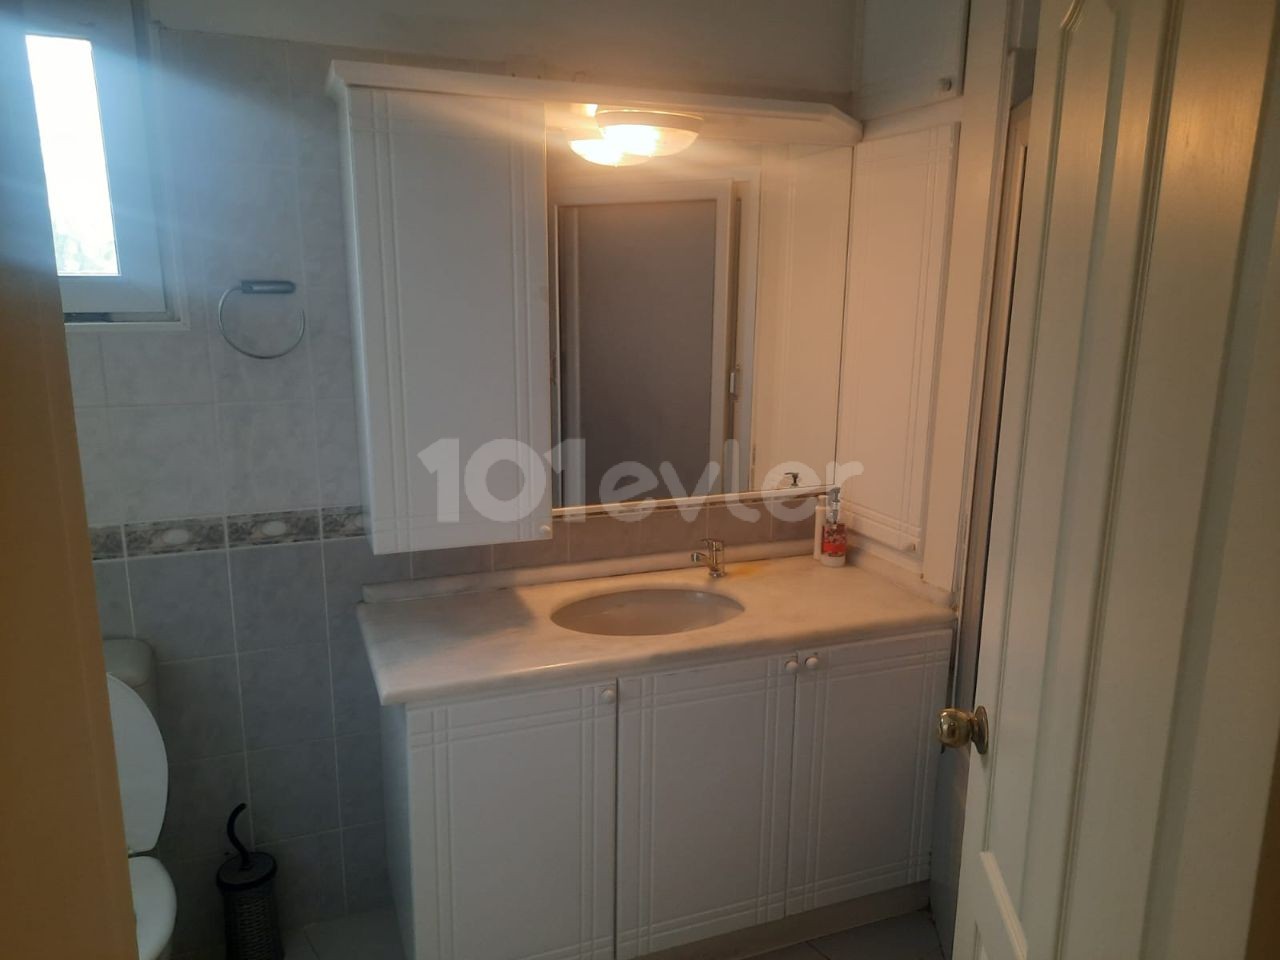 3+1 APARTMENT WITH COMMERCIAL PERMIT IN ORTAKOY, LEFKOŞA